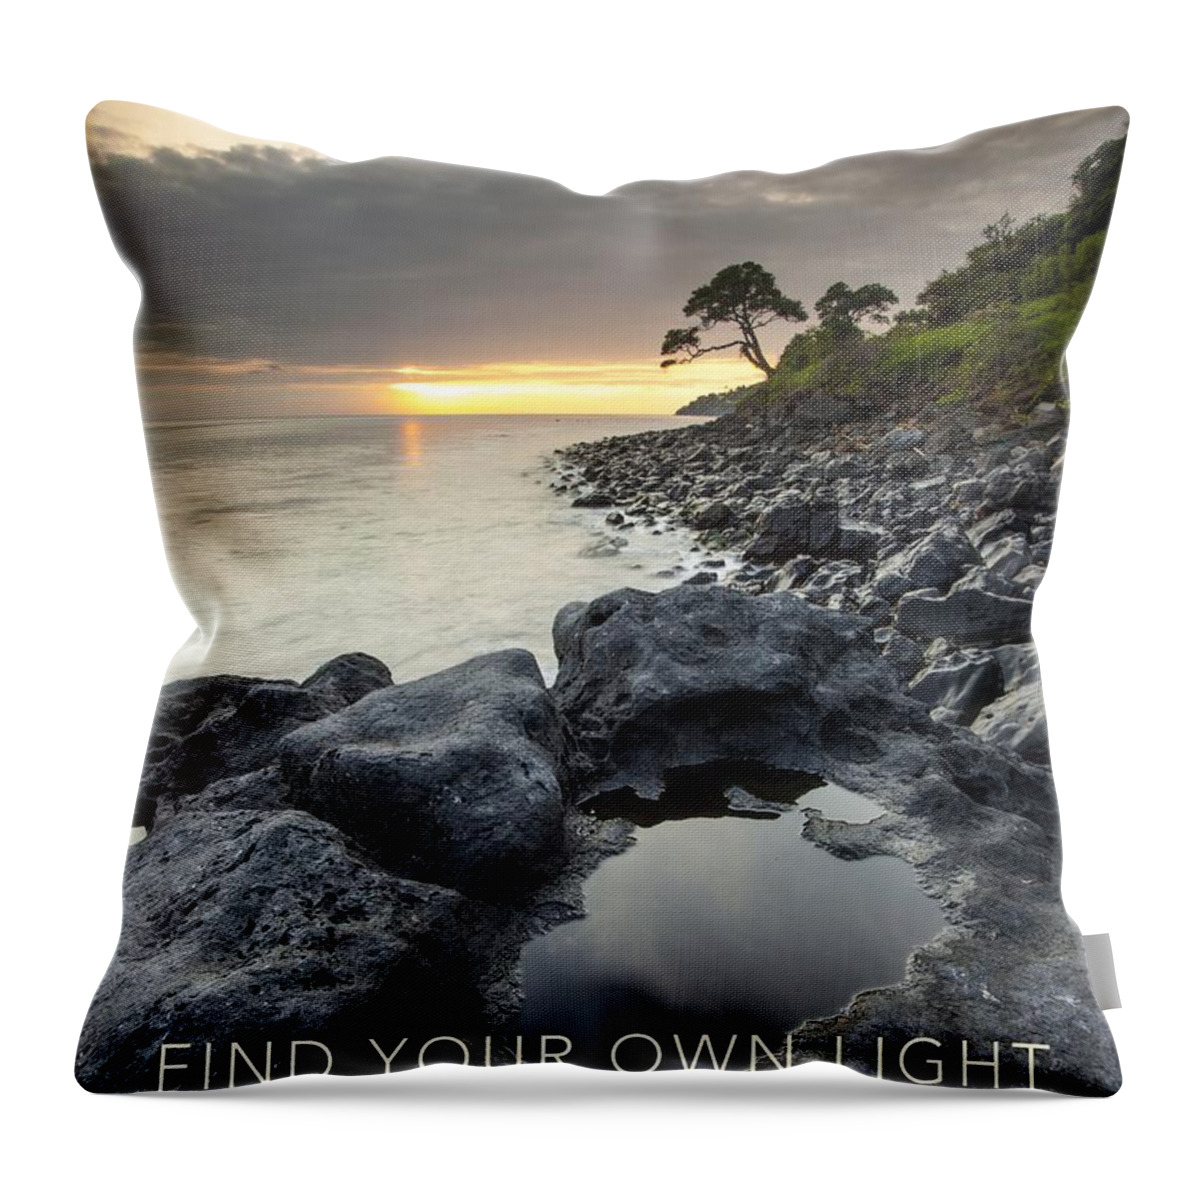 Sunrise Throw Pillow featuring the photograph Find Your Own Light by Gail Marten